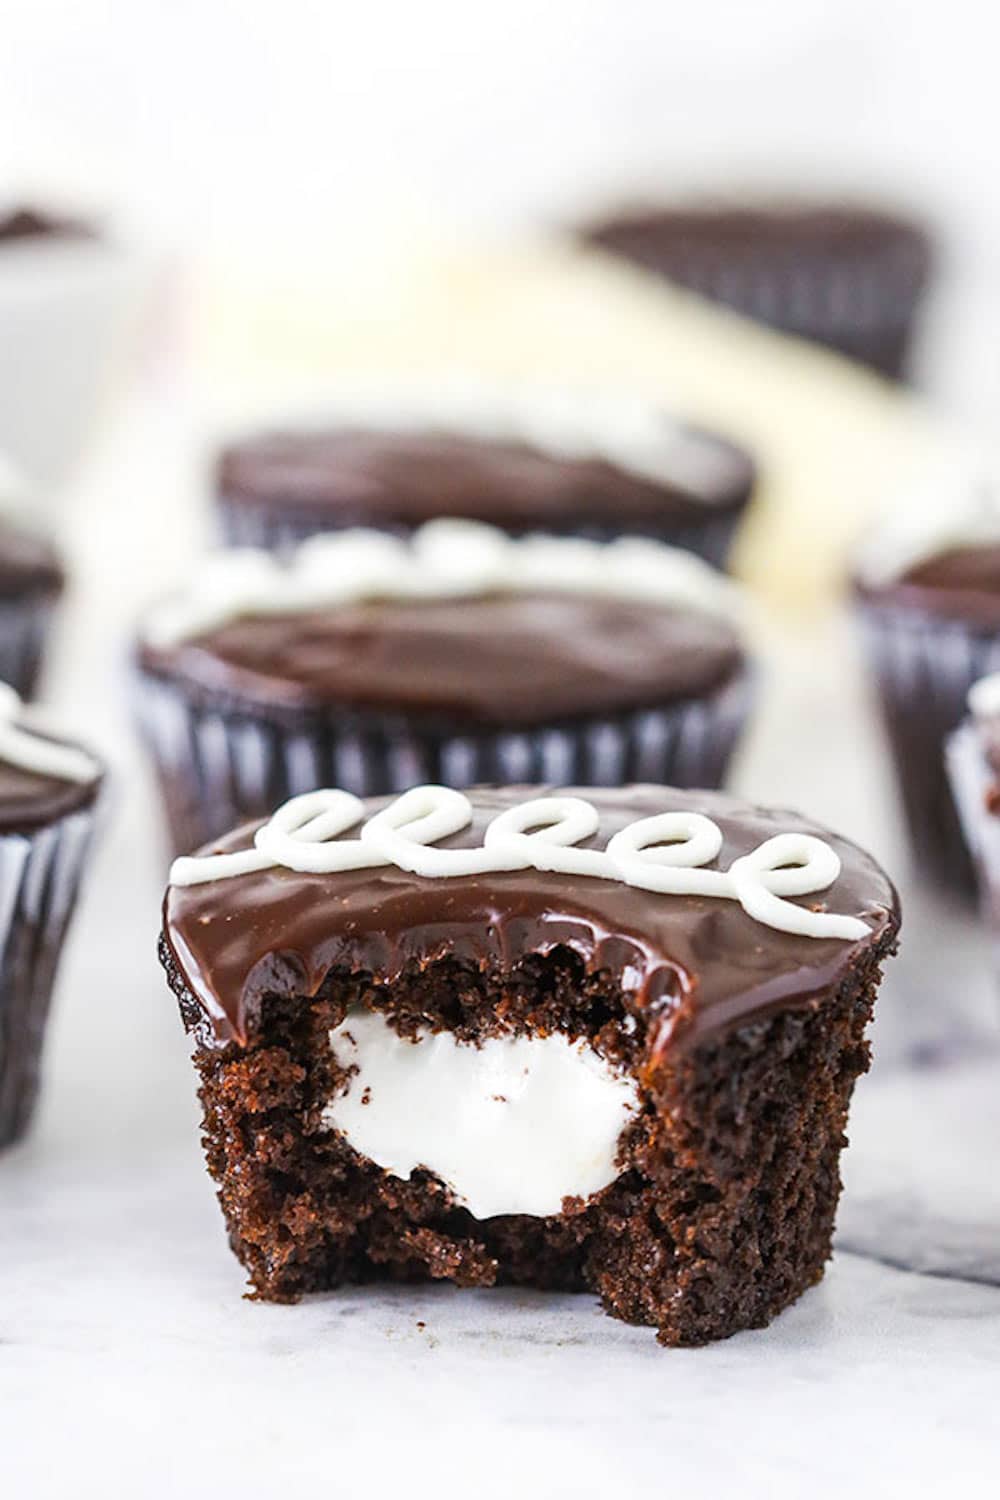 A Bitten Hostess Cupcake with Marshmallow Filling in the Middle.